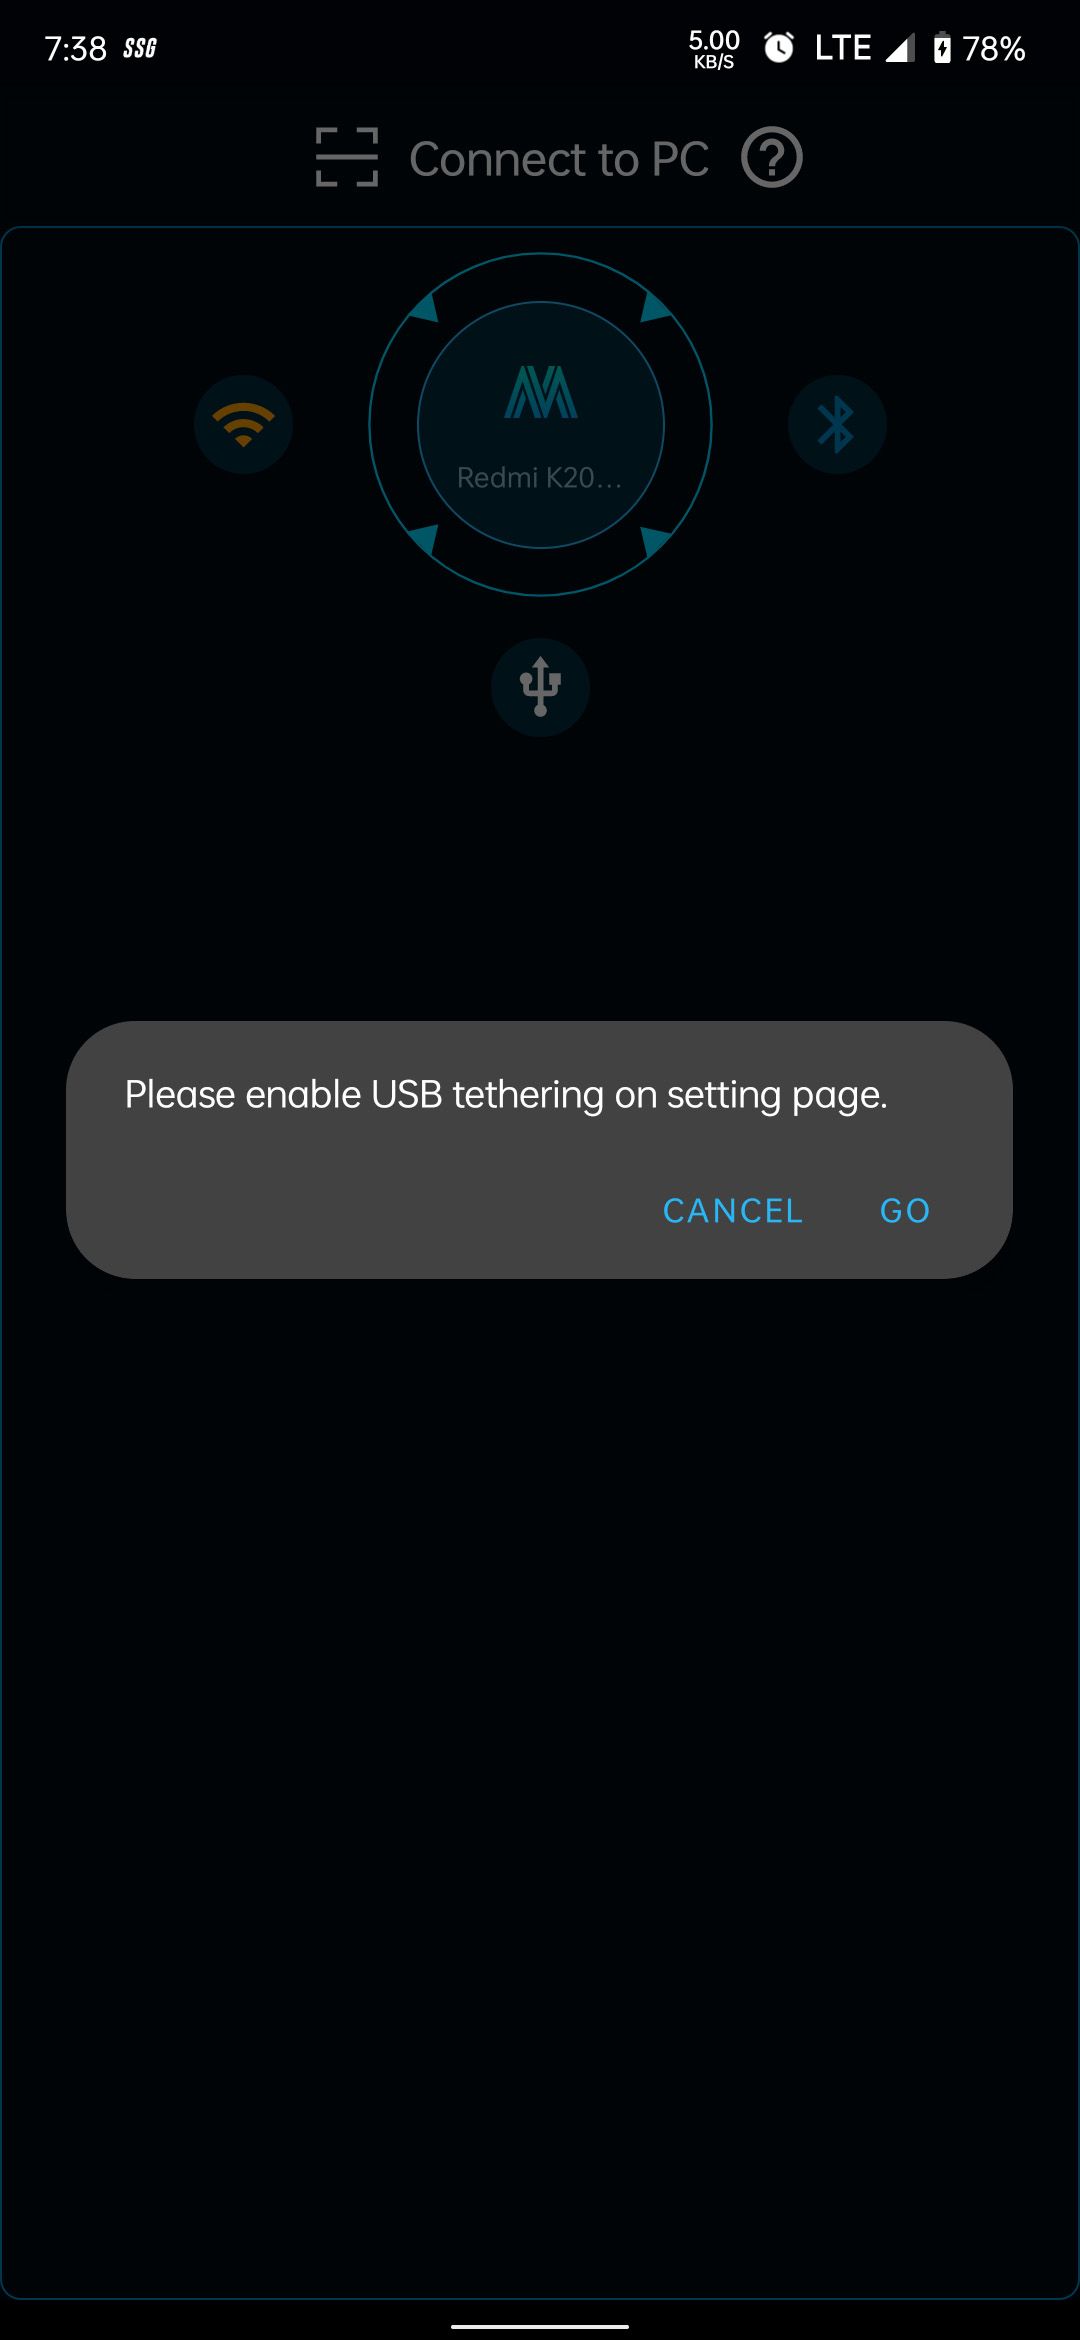 App asking to enable USB Tethering